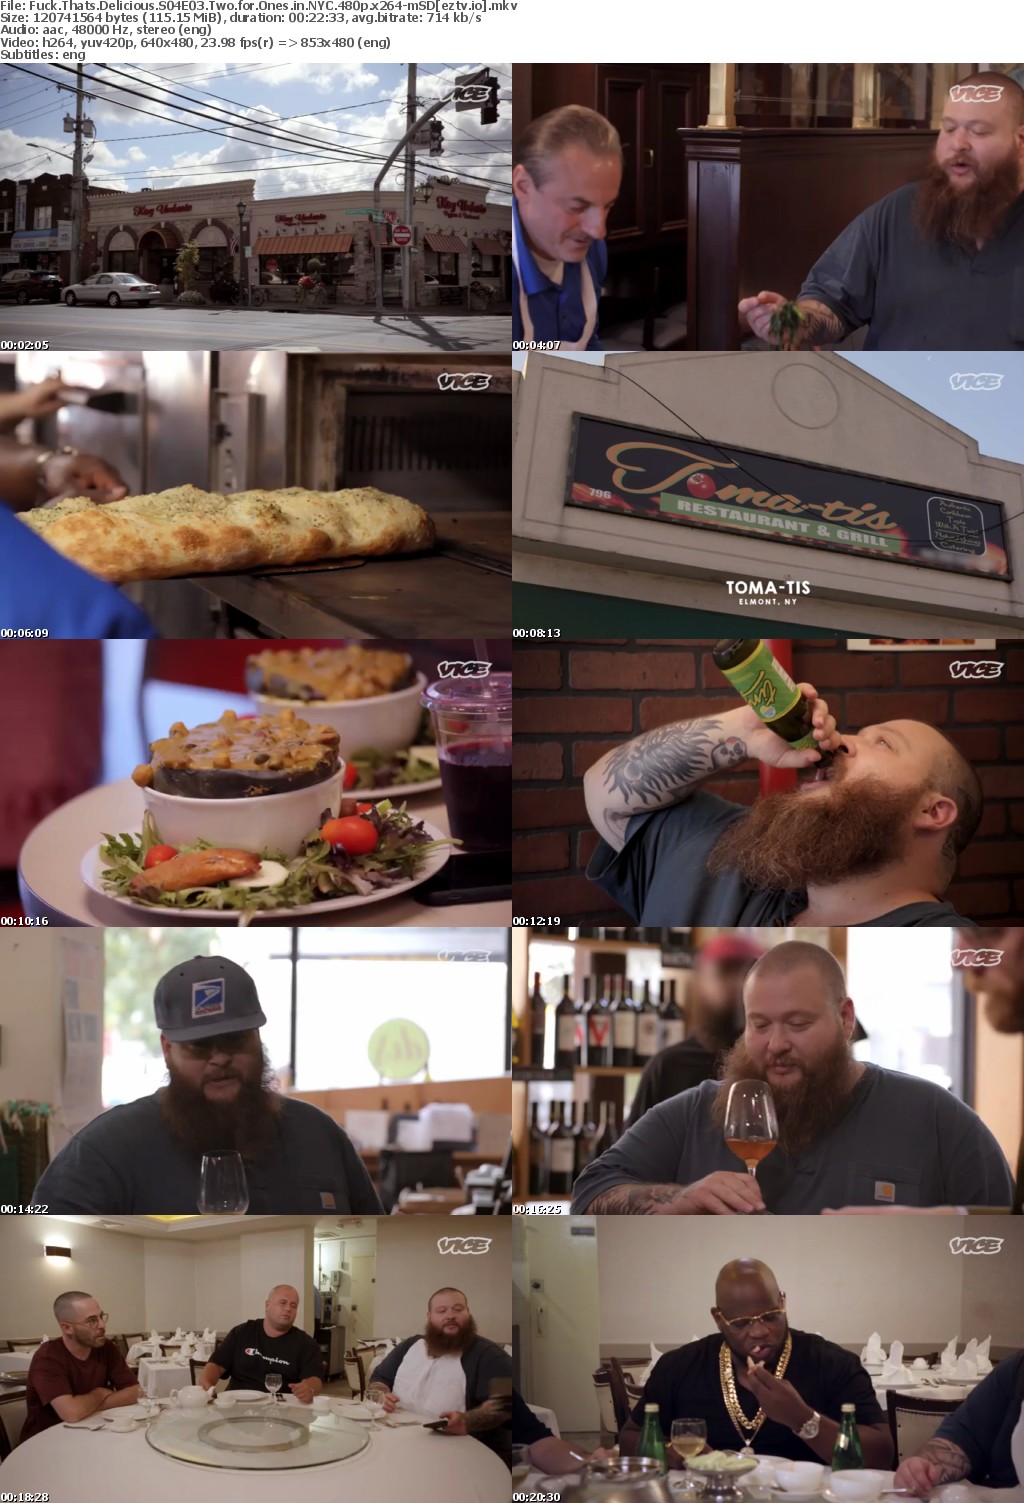 Fuck Thats Delicious S04E03 Two for Ones in NYC 480p x264-mSD